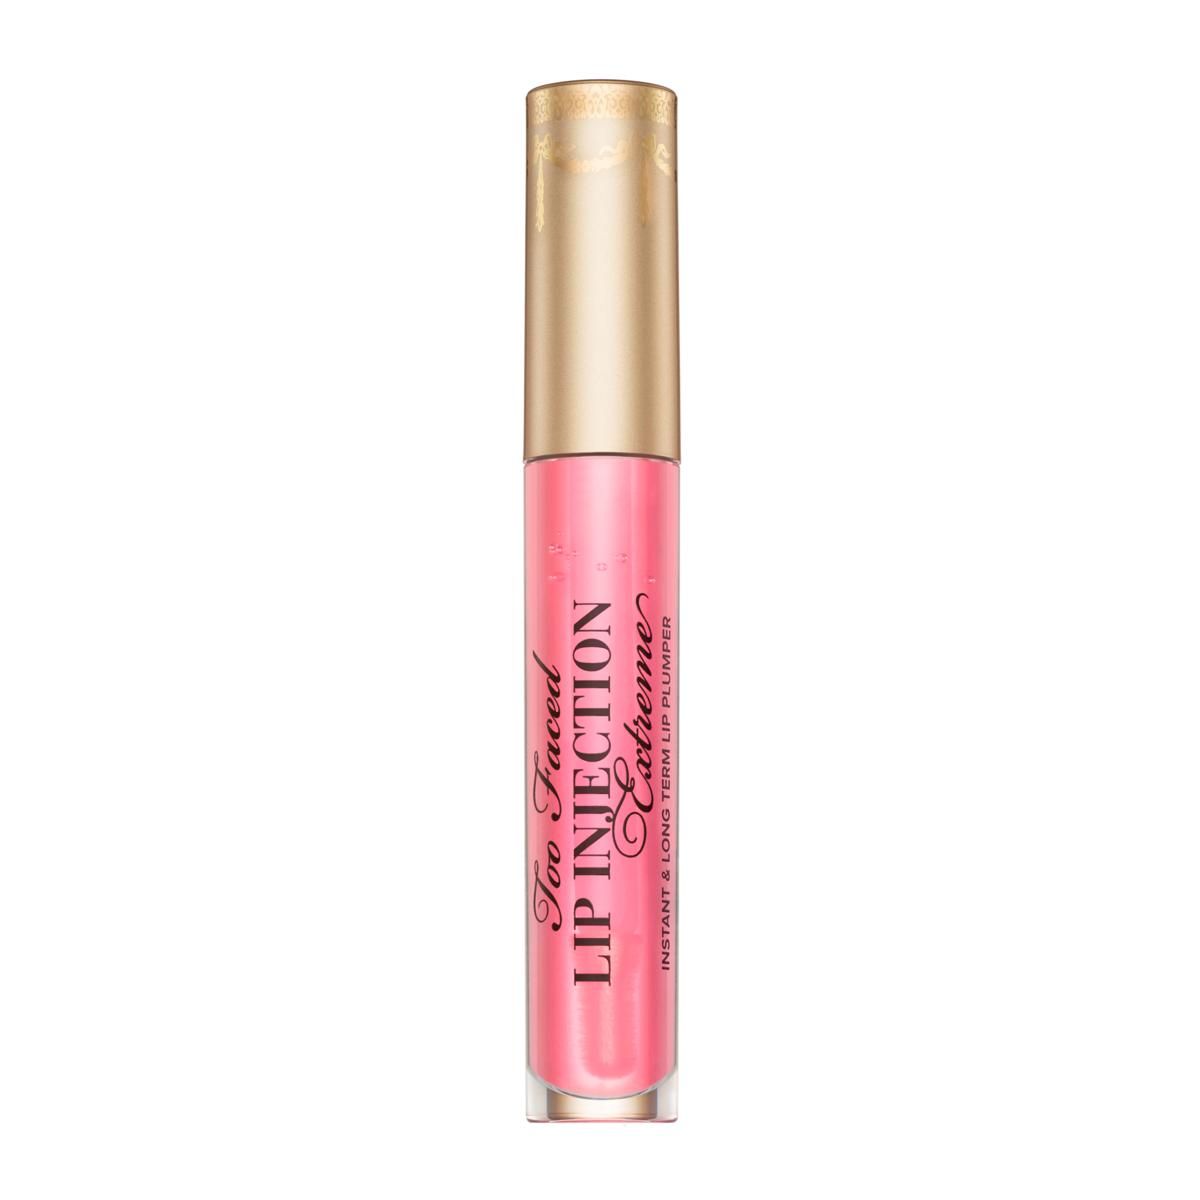 Too Faced Lip Injection Extreme Lip Plumper - 9539859 | HSN | HSN